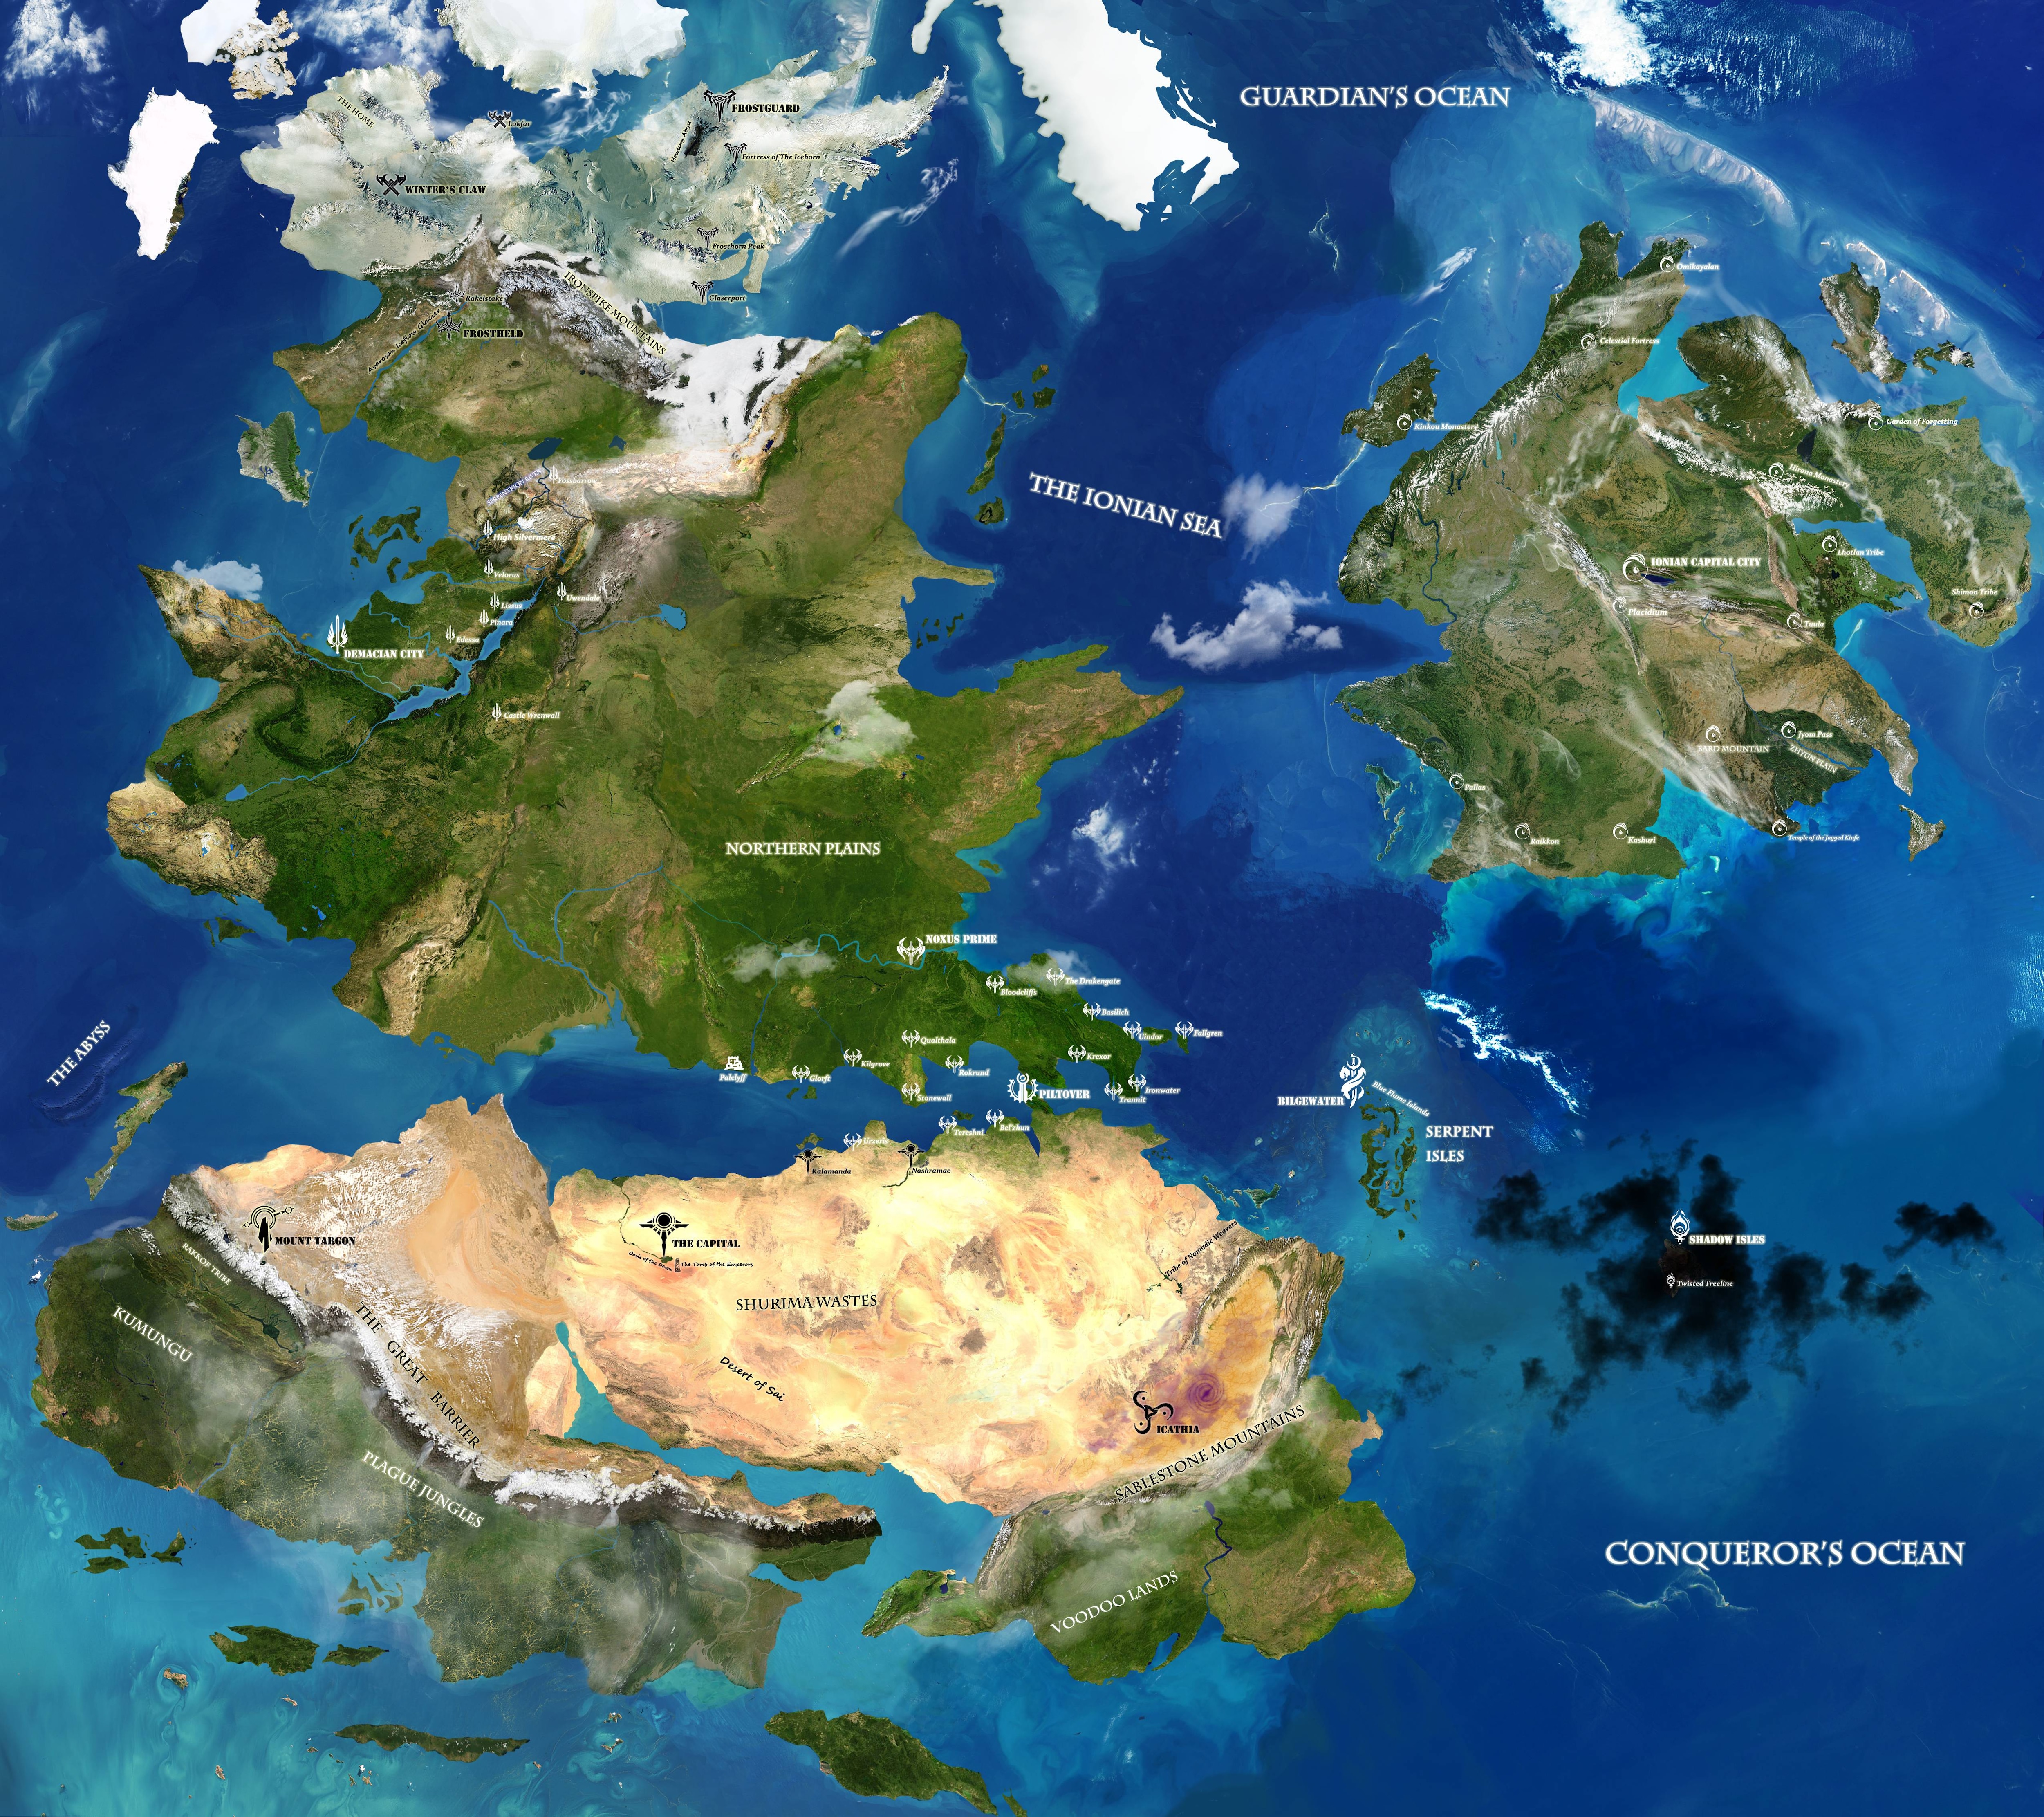 Map of Runeterra (magic Earth), where the League of Legends lore takes